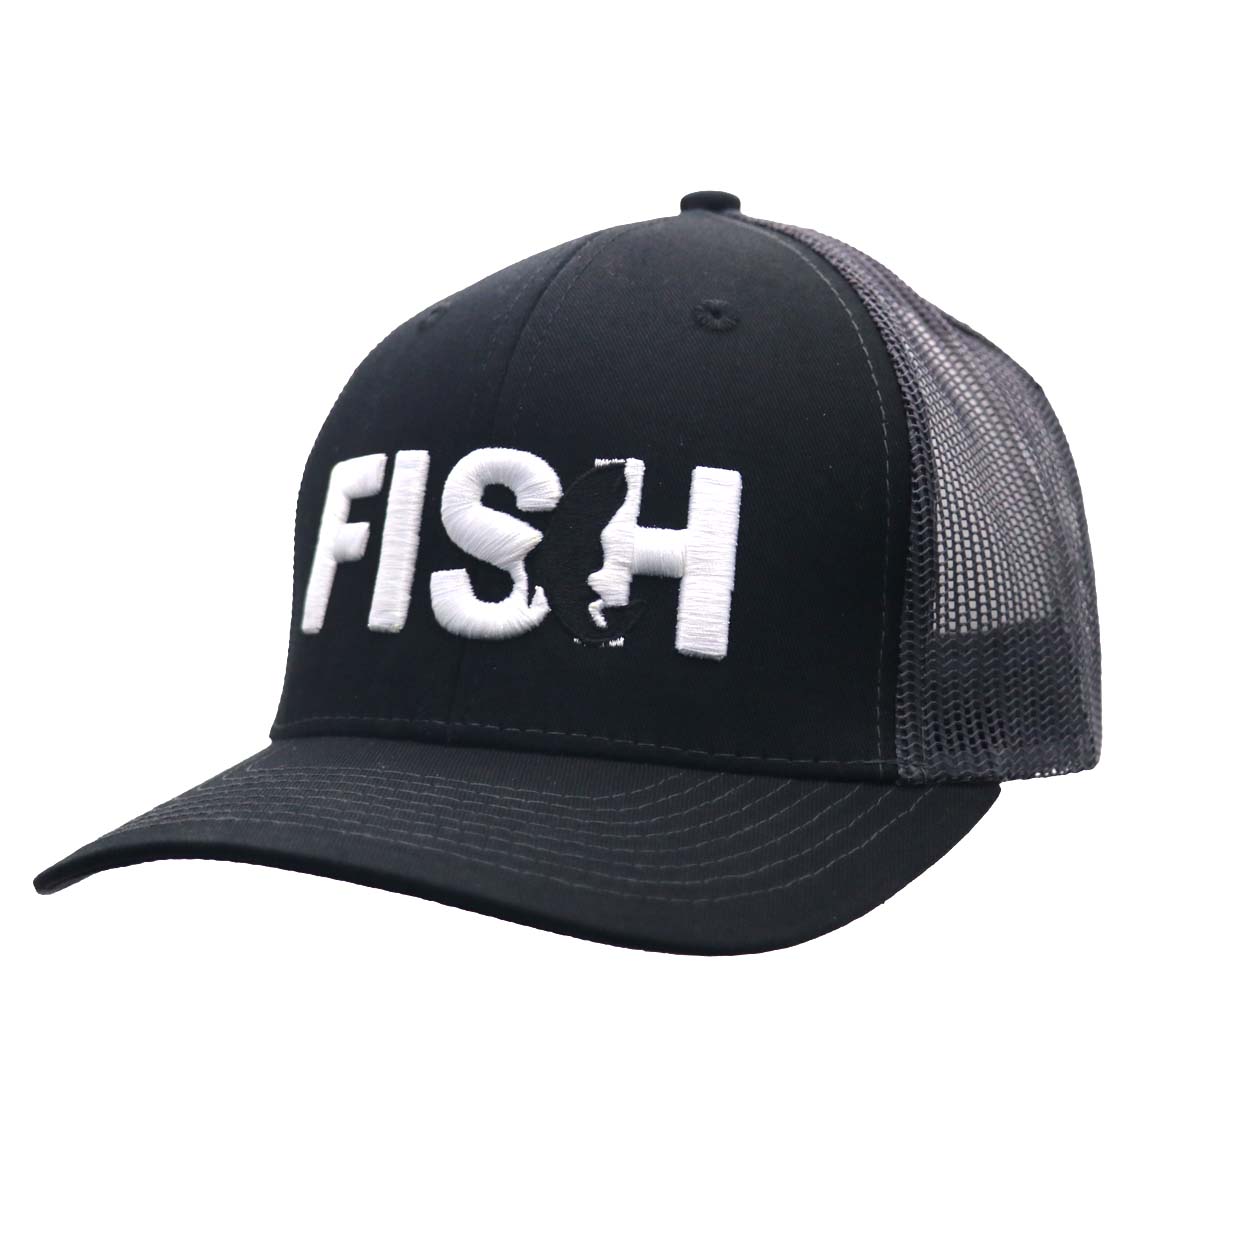 Fish Catch Logo Classic Embroidered Snapback Trucker Hat Black/Charcoal